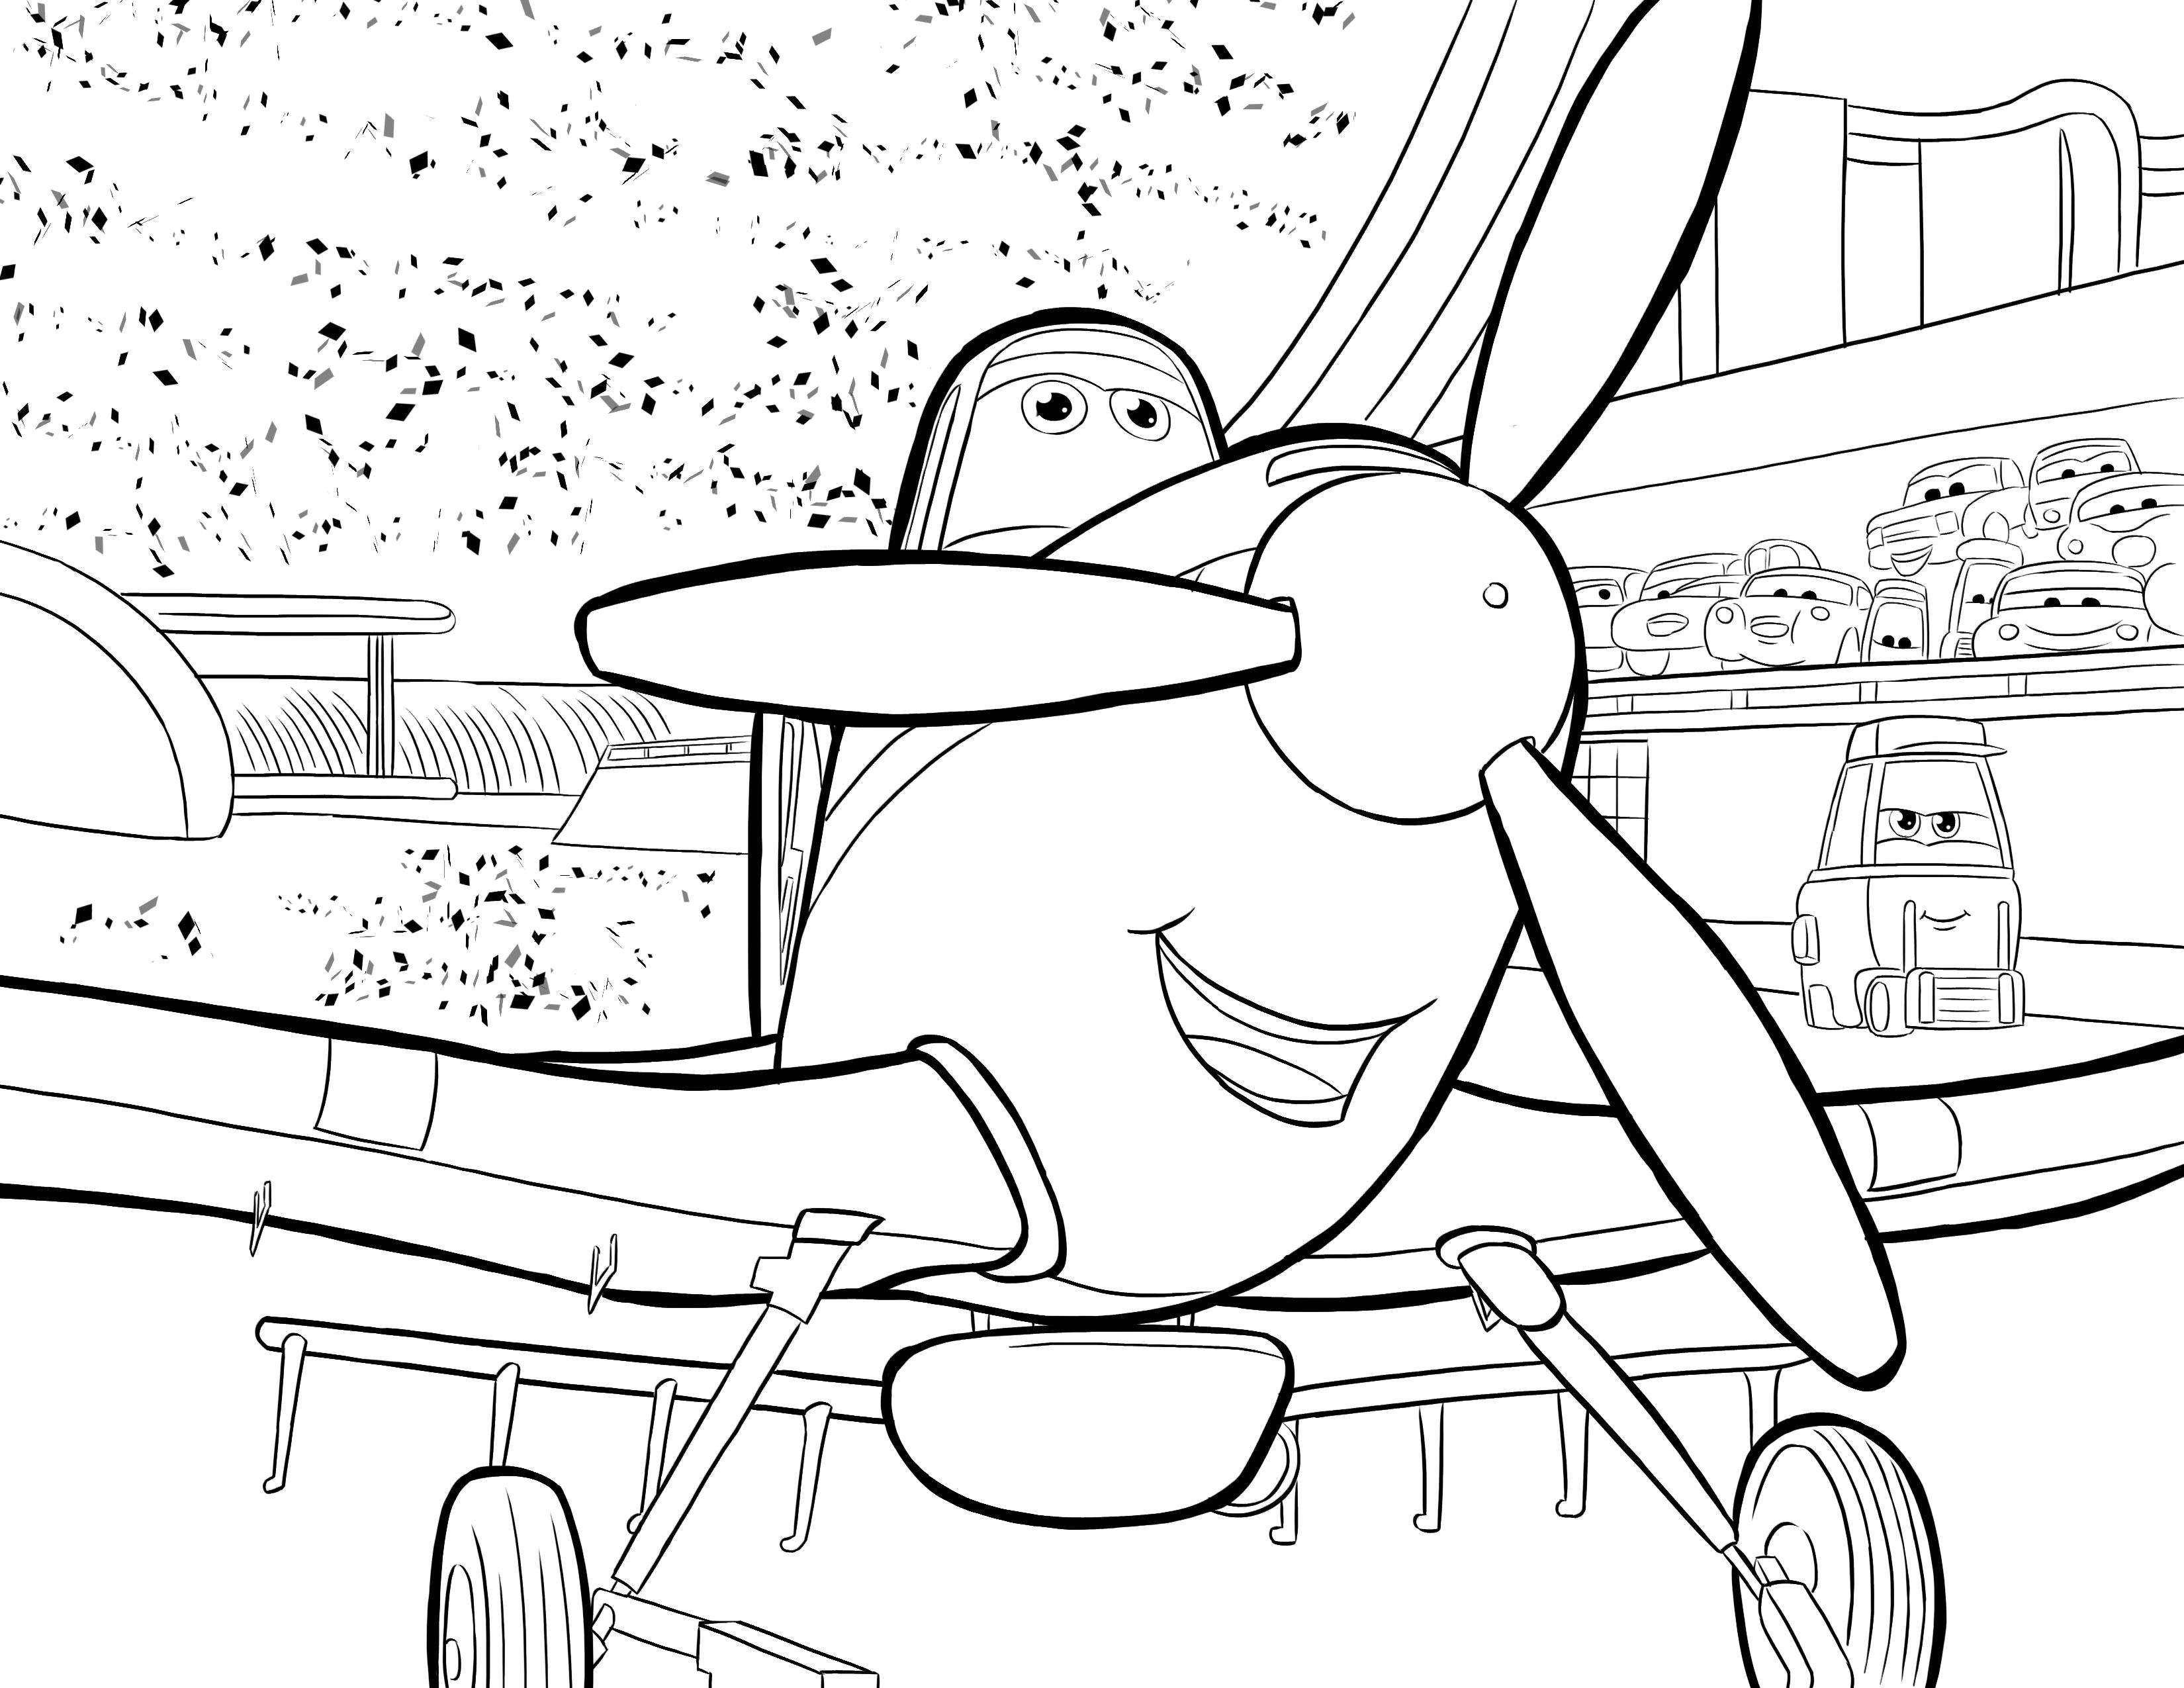 Coloring Airplane. Category The planes. Tags:  Cartoon character.